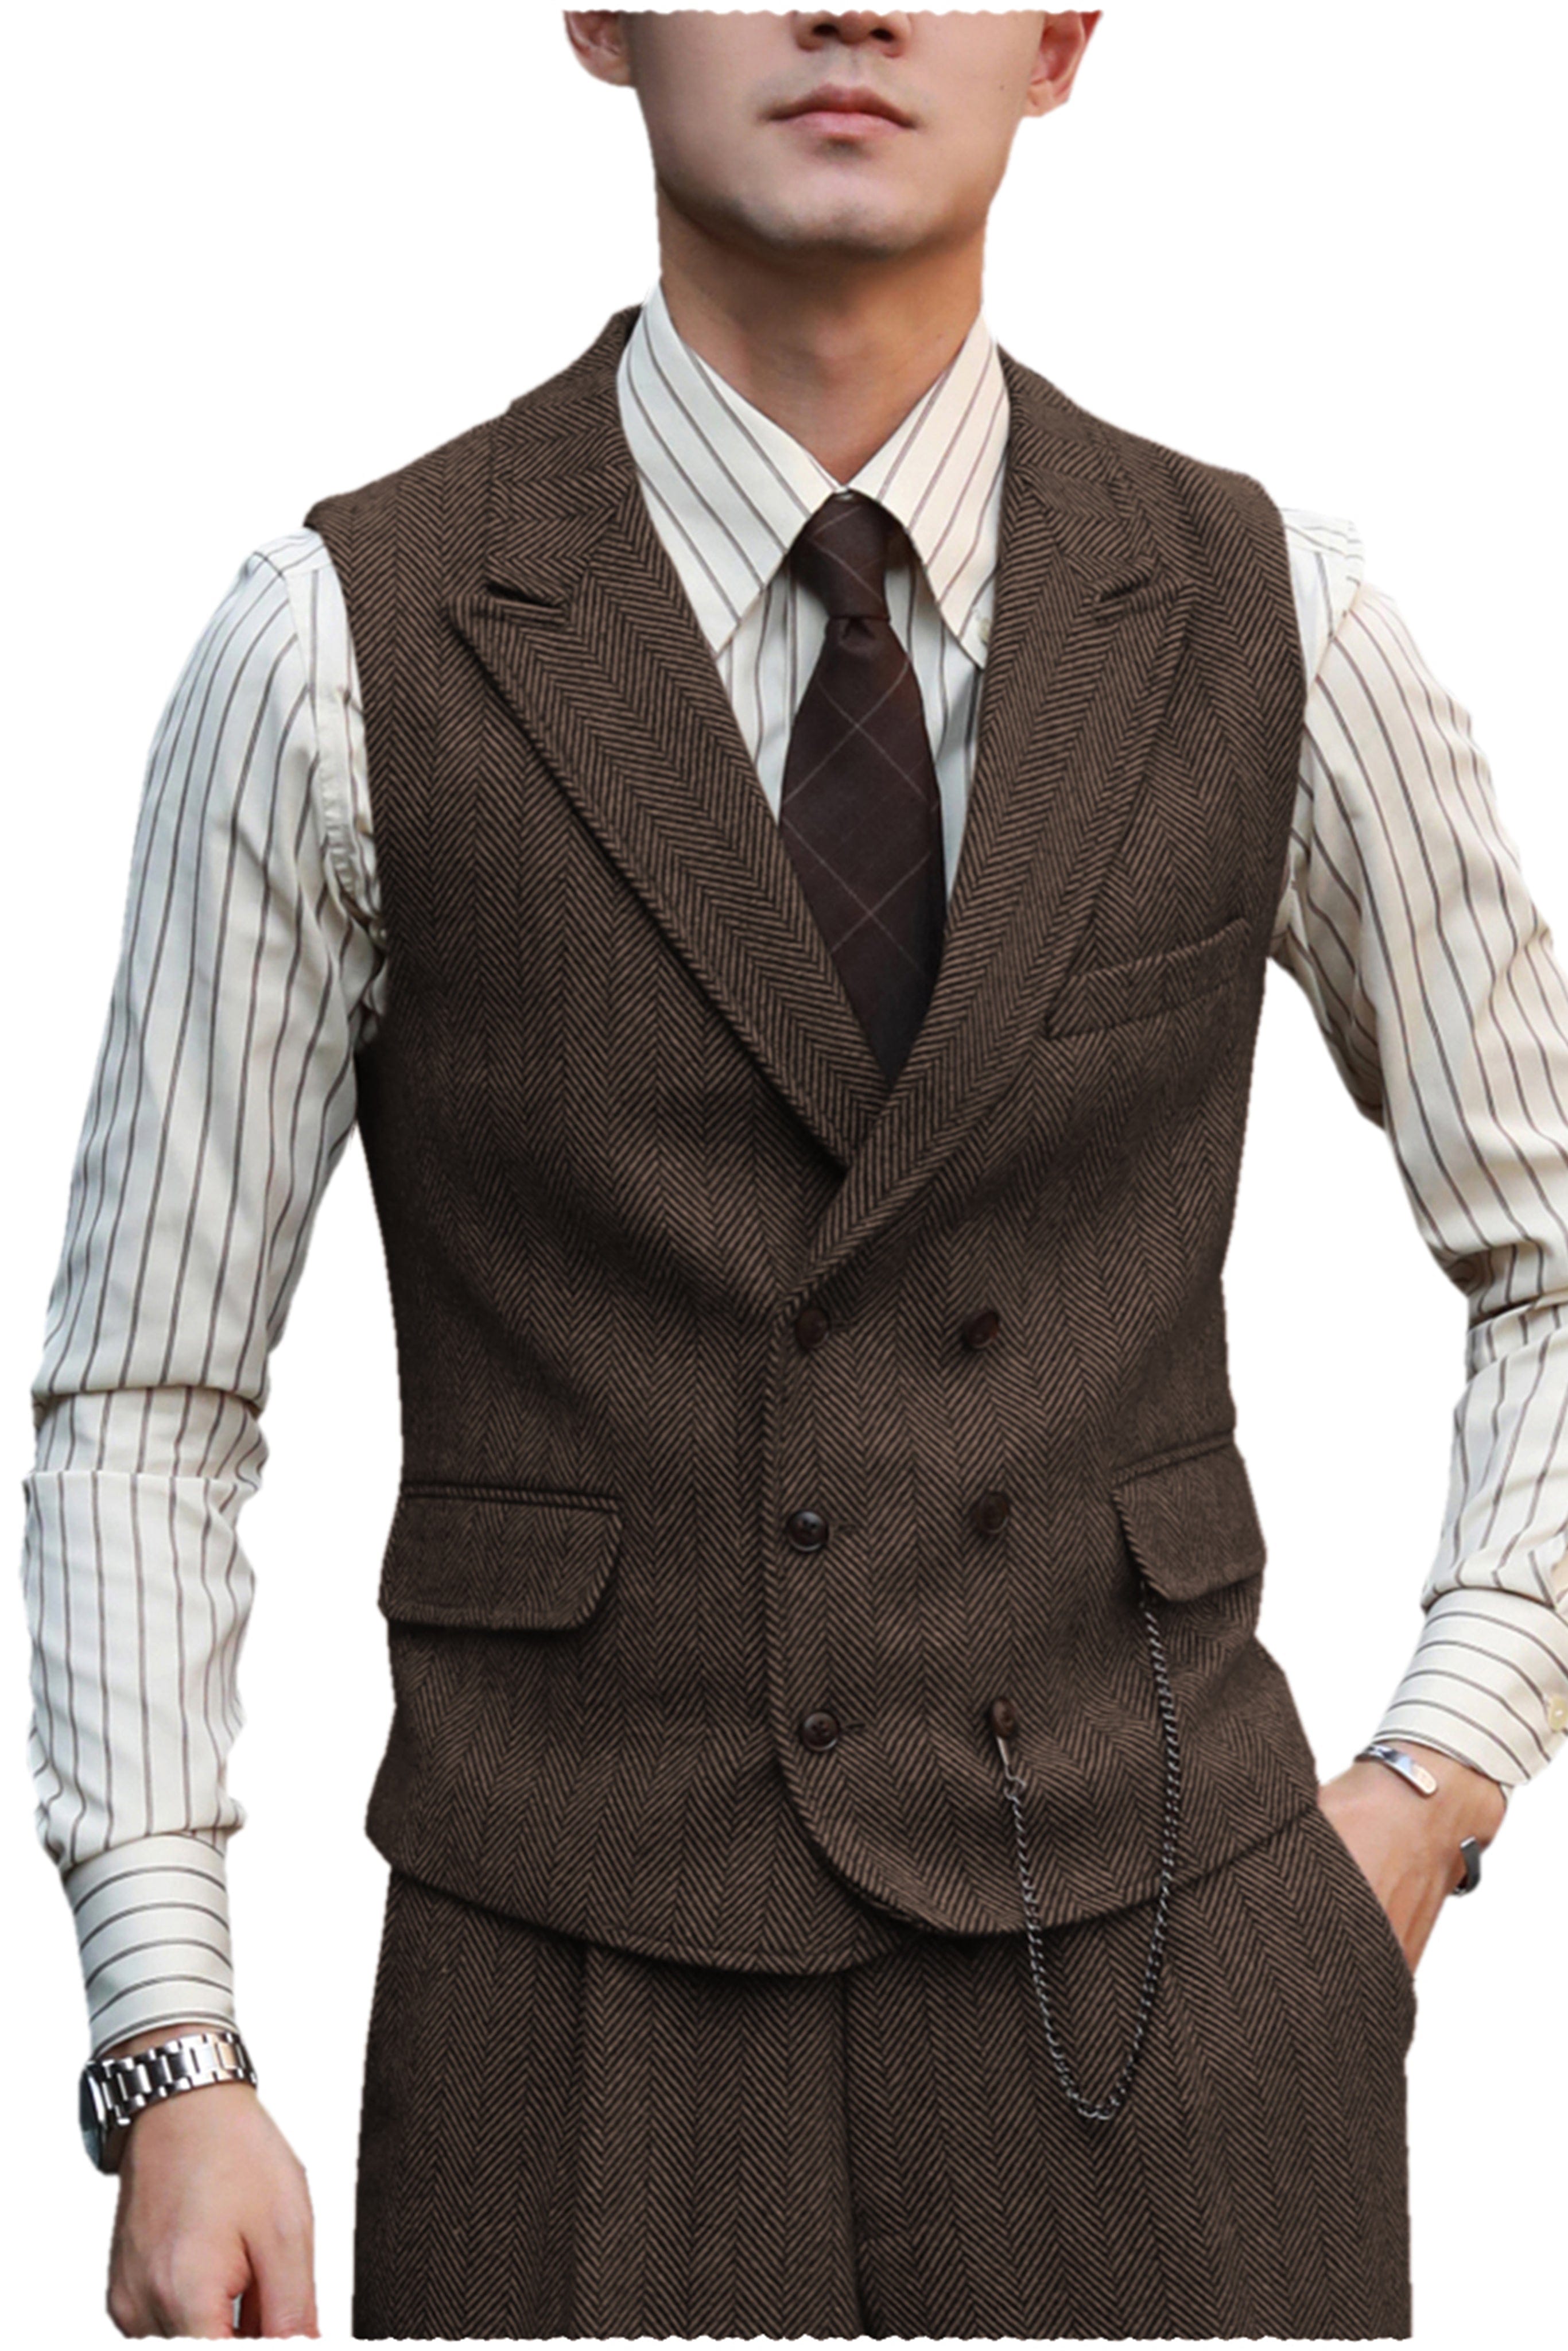 Tweed Waistcoat and Pants - Tweed Suit - He Spoke Style | Mens fashion suits,  Mens outfits, Mens fashion classic